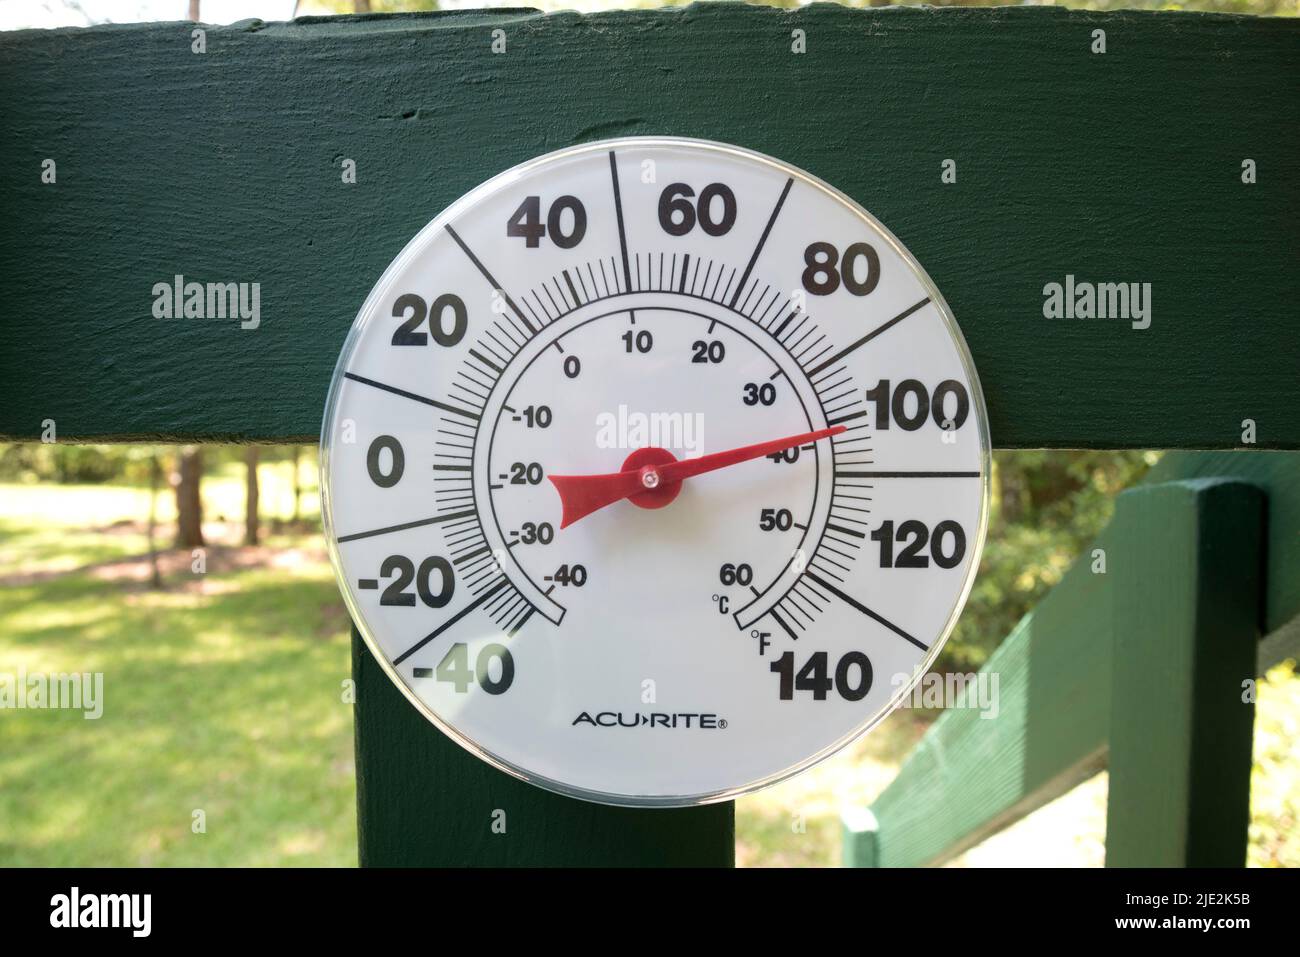 Over 100 degree day in North Central Florida during record breaking heat wave... Stock Photo